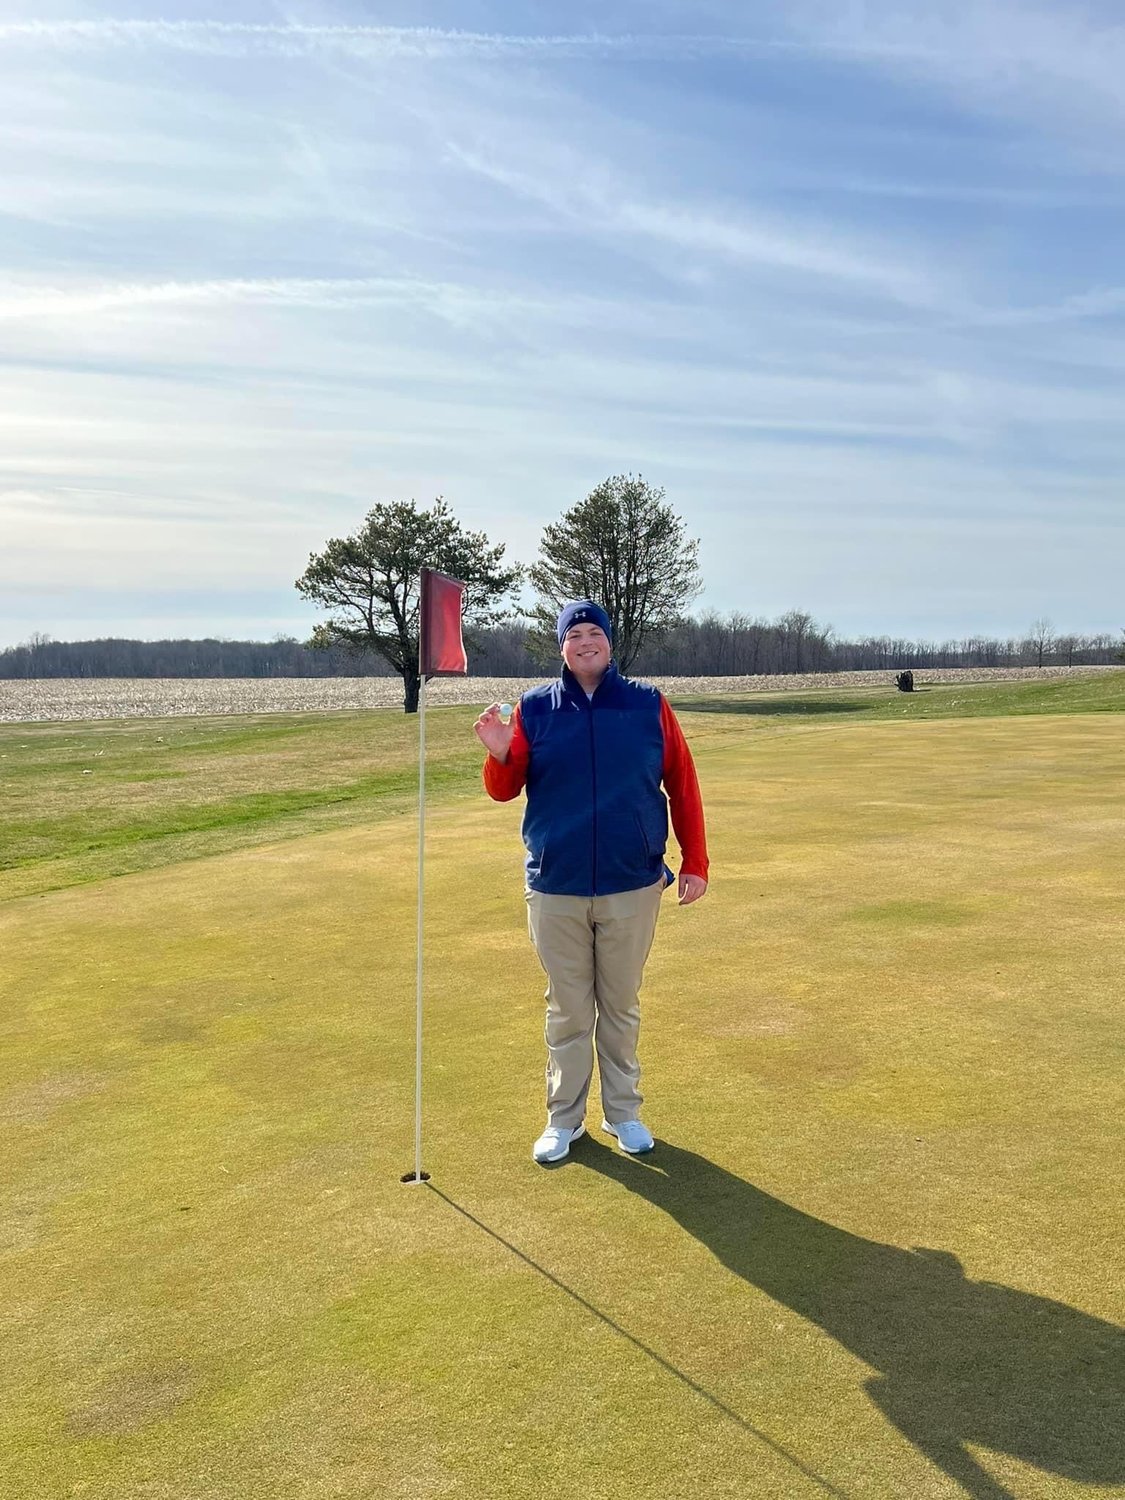 Bob Ryker recorded his first hole in one last Wednesday (Mar. 15) at Rocky Ridge Golf Club in Darlington. The hole in one was on hole No. 6 from 125 yards out. Ryker, who is the current head coach of the North Montgomery golf programs, used a wedge.